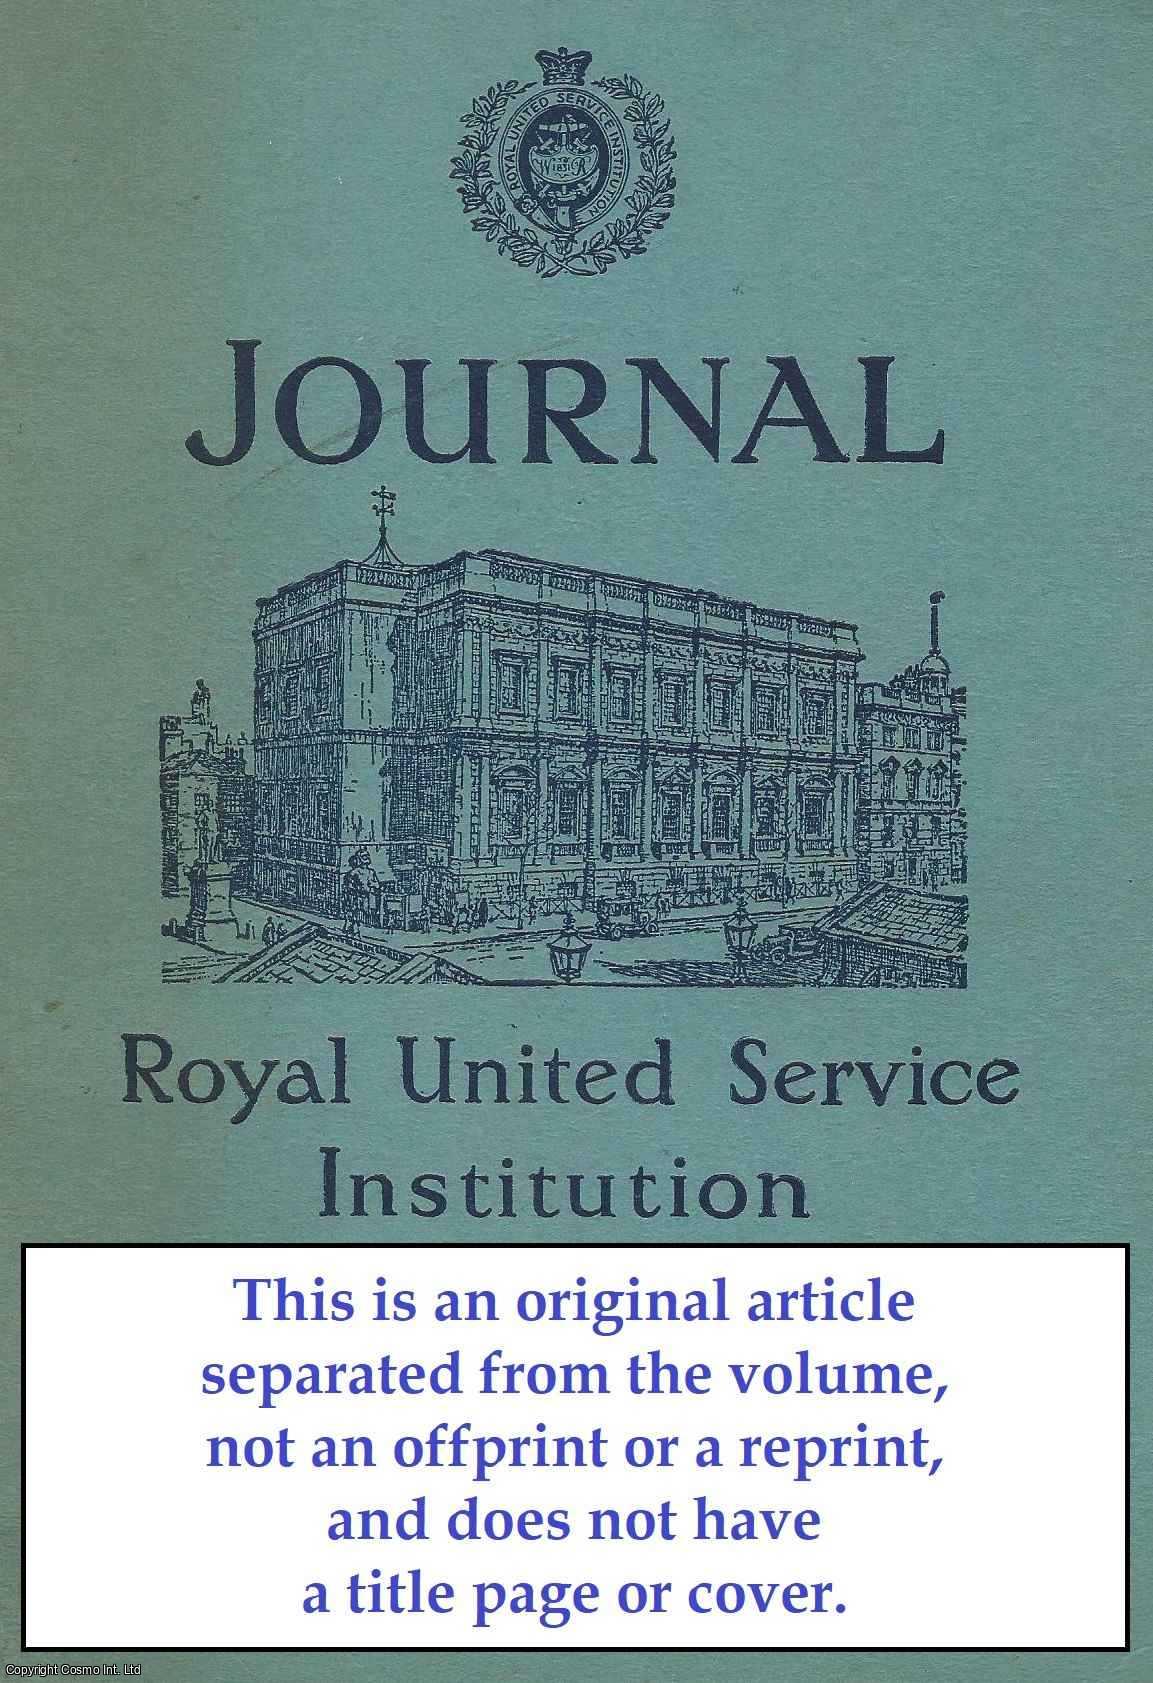 Richard Goold-Adams - Devolution of Empire. An original article from The Royal United Service Institution Journal, 1962.